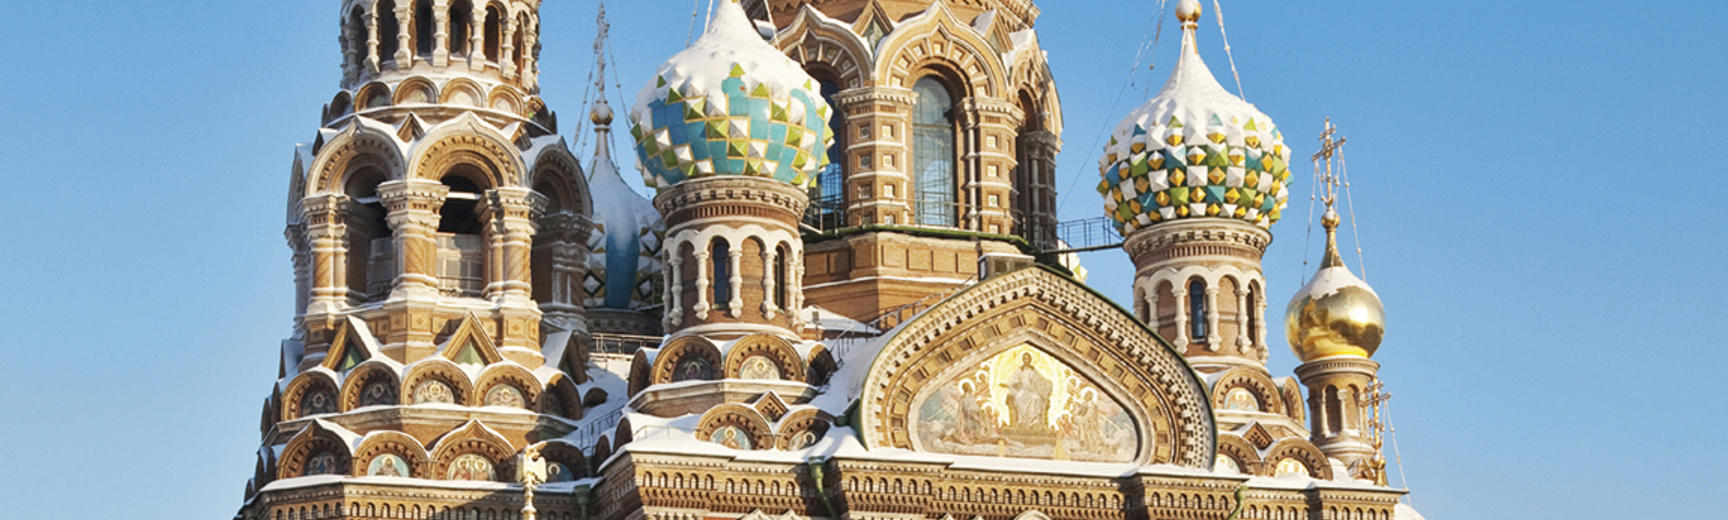 Part of the top section of The Church of the Savior on Spilled Blood in Saint Petersburg